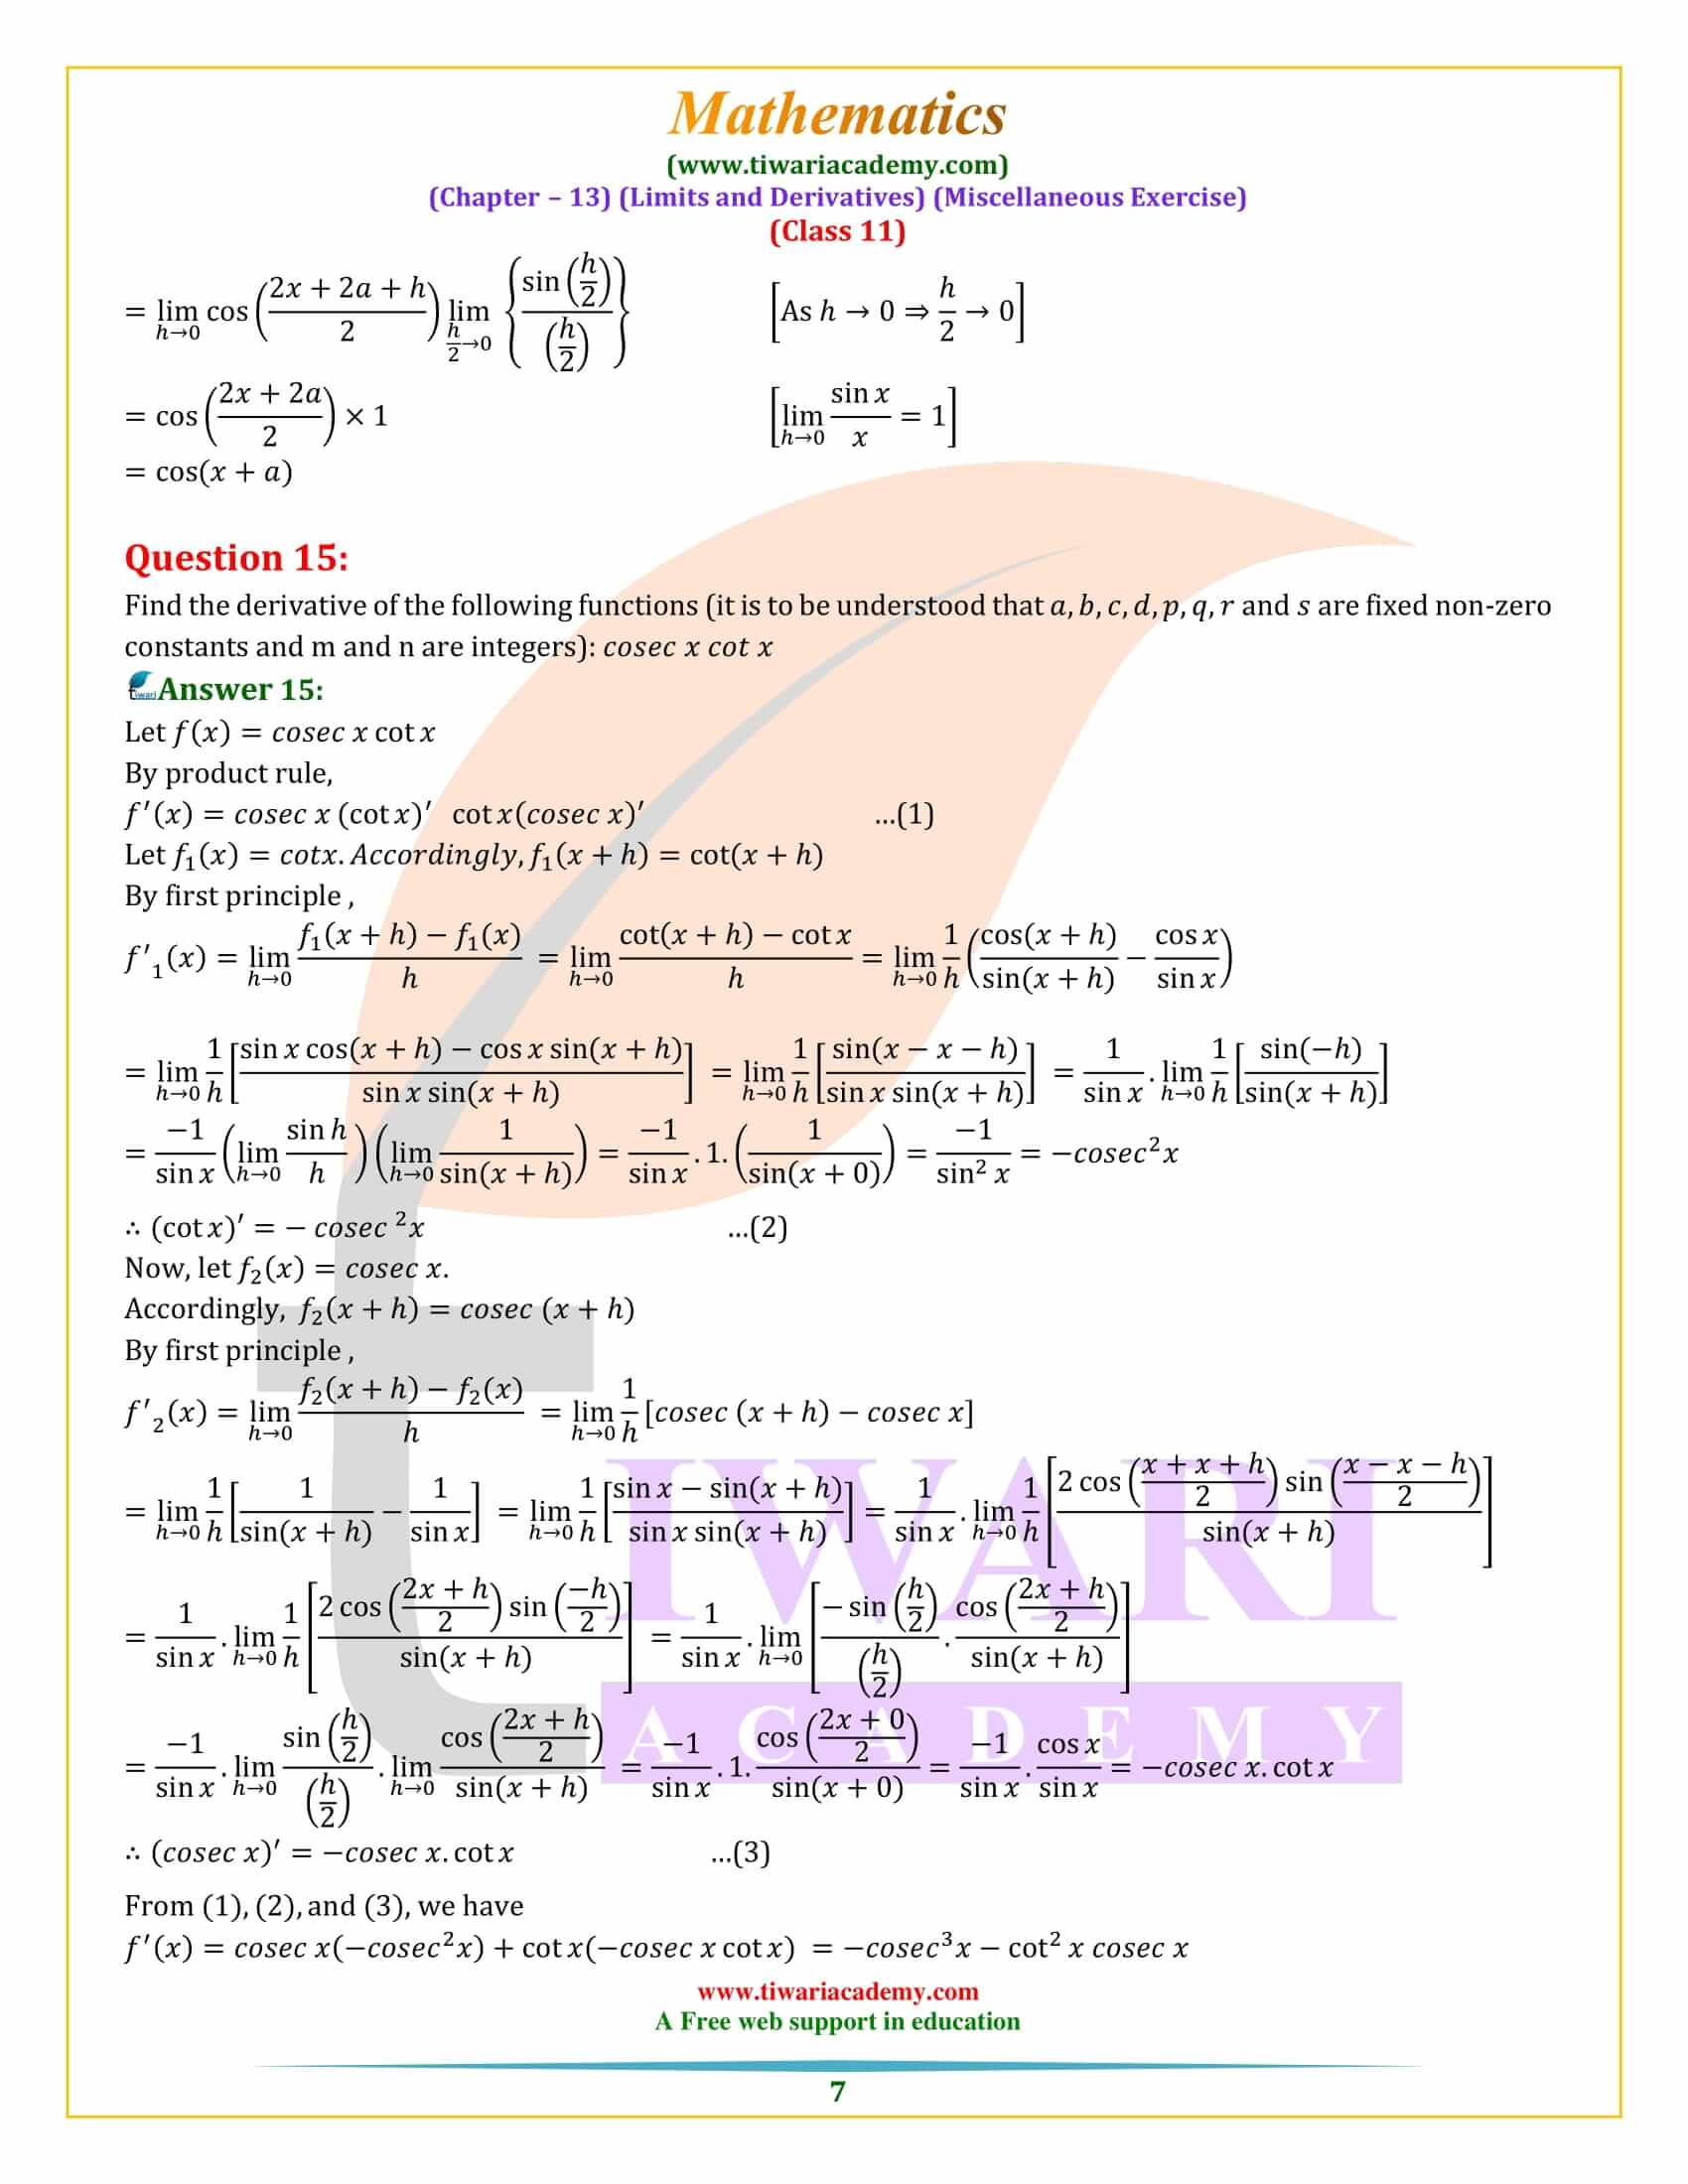 NCERT Solutions for Class 11 Maths Chapter 13 Miscellaneous Exercise in PDF